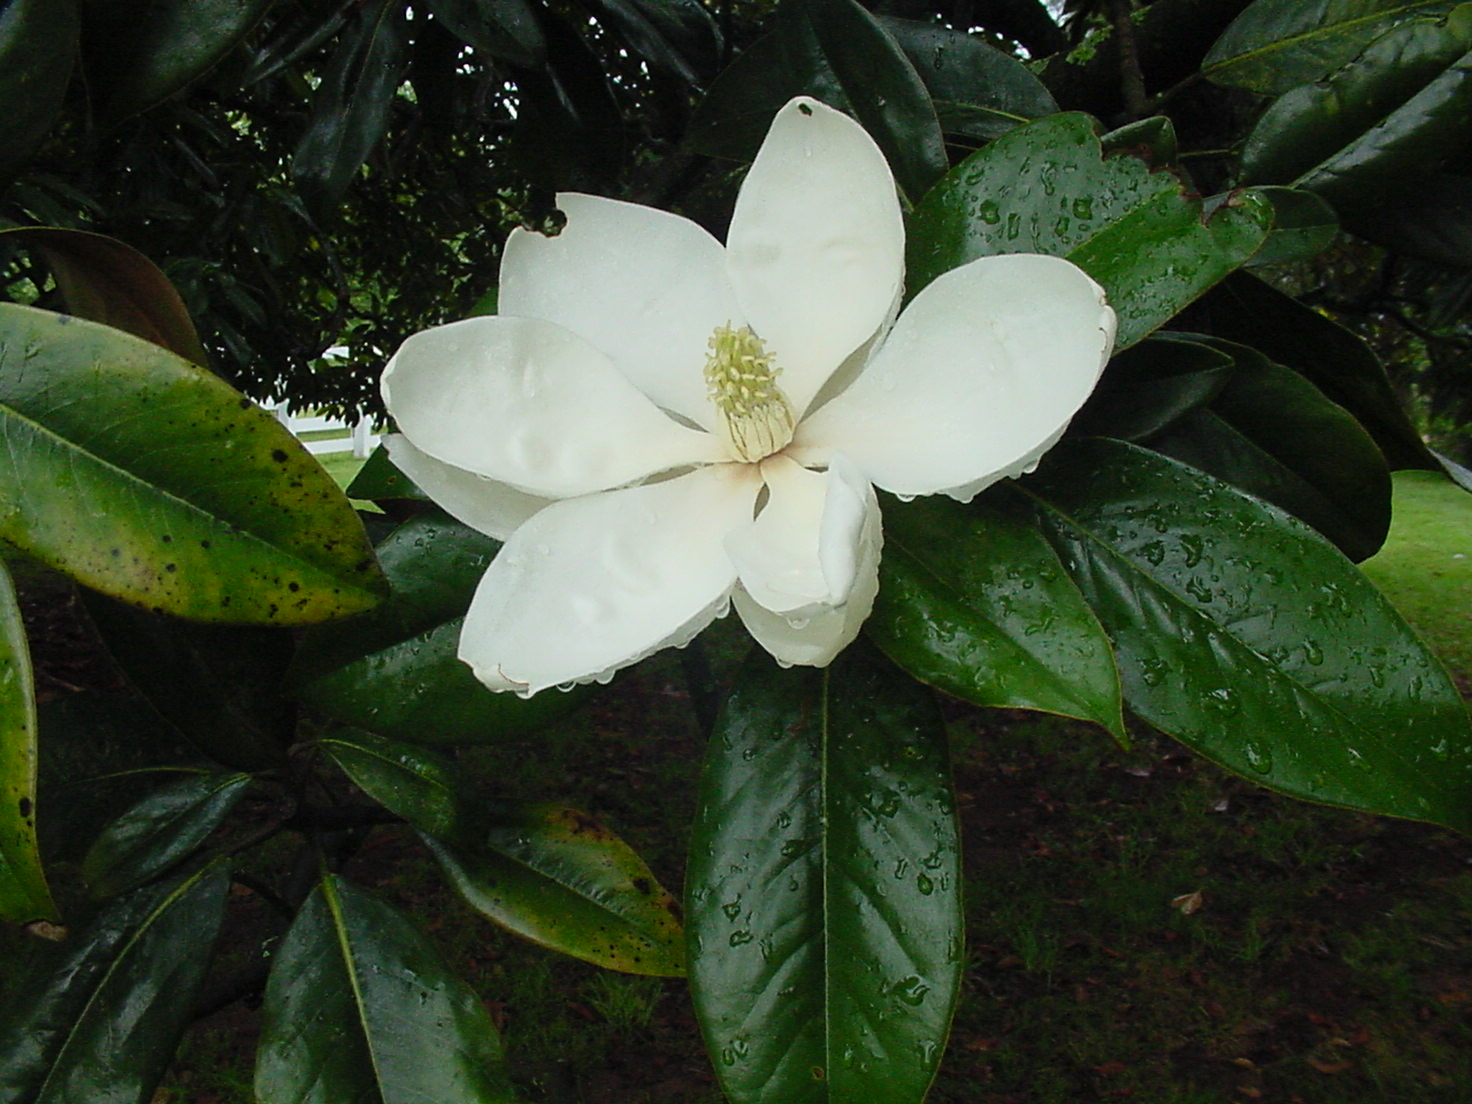 I just had to take a close-up of a magnolia blossom.  Notice the droplets of rain.